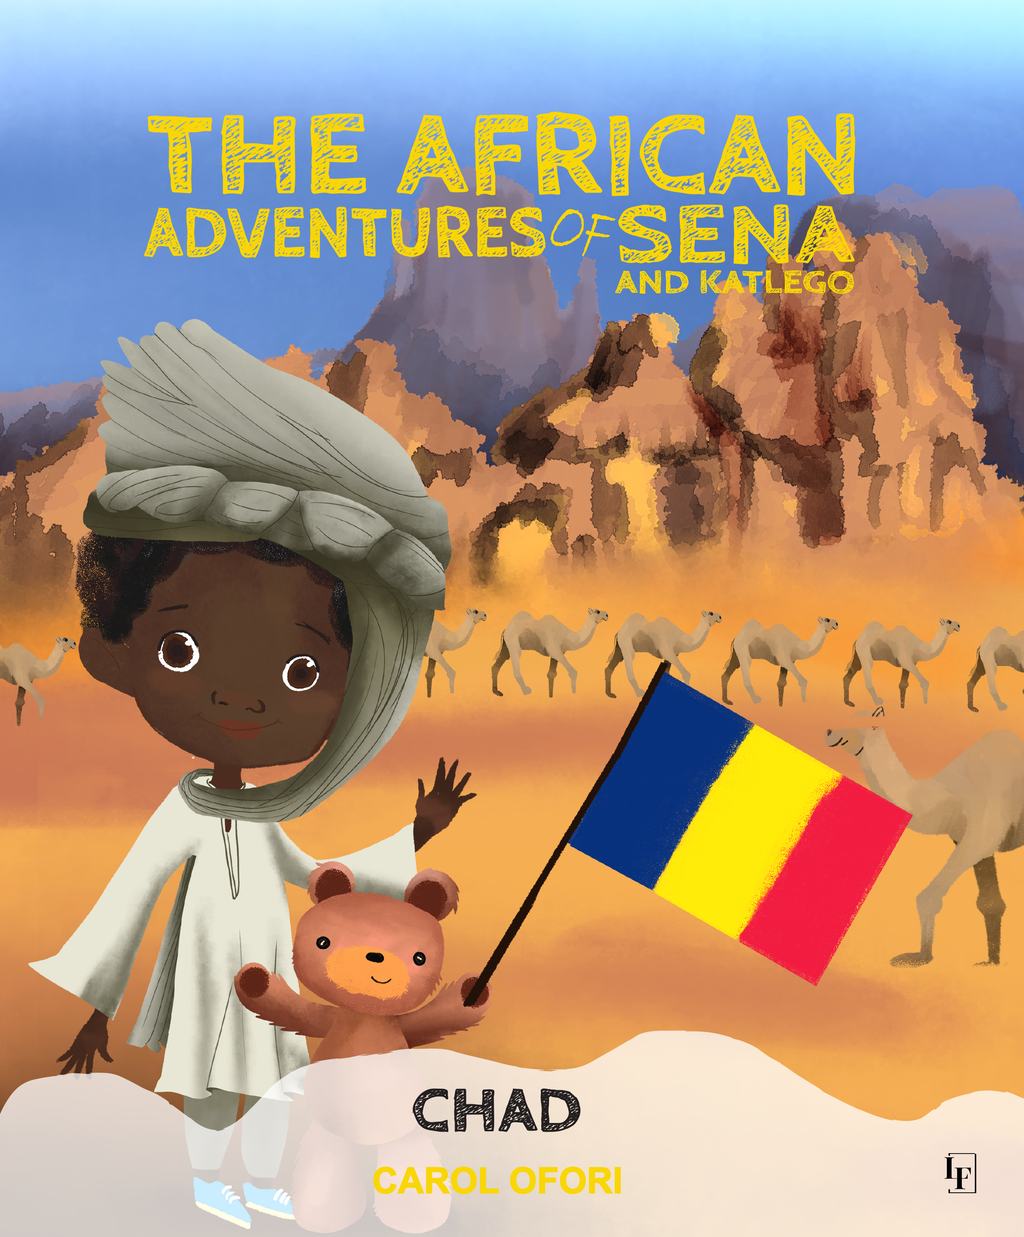 The African Adventures of Sena and Katlego: Chad